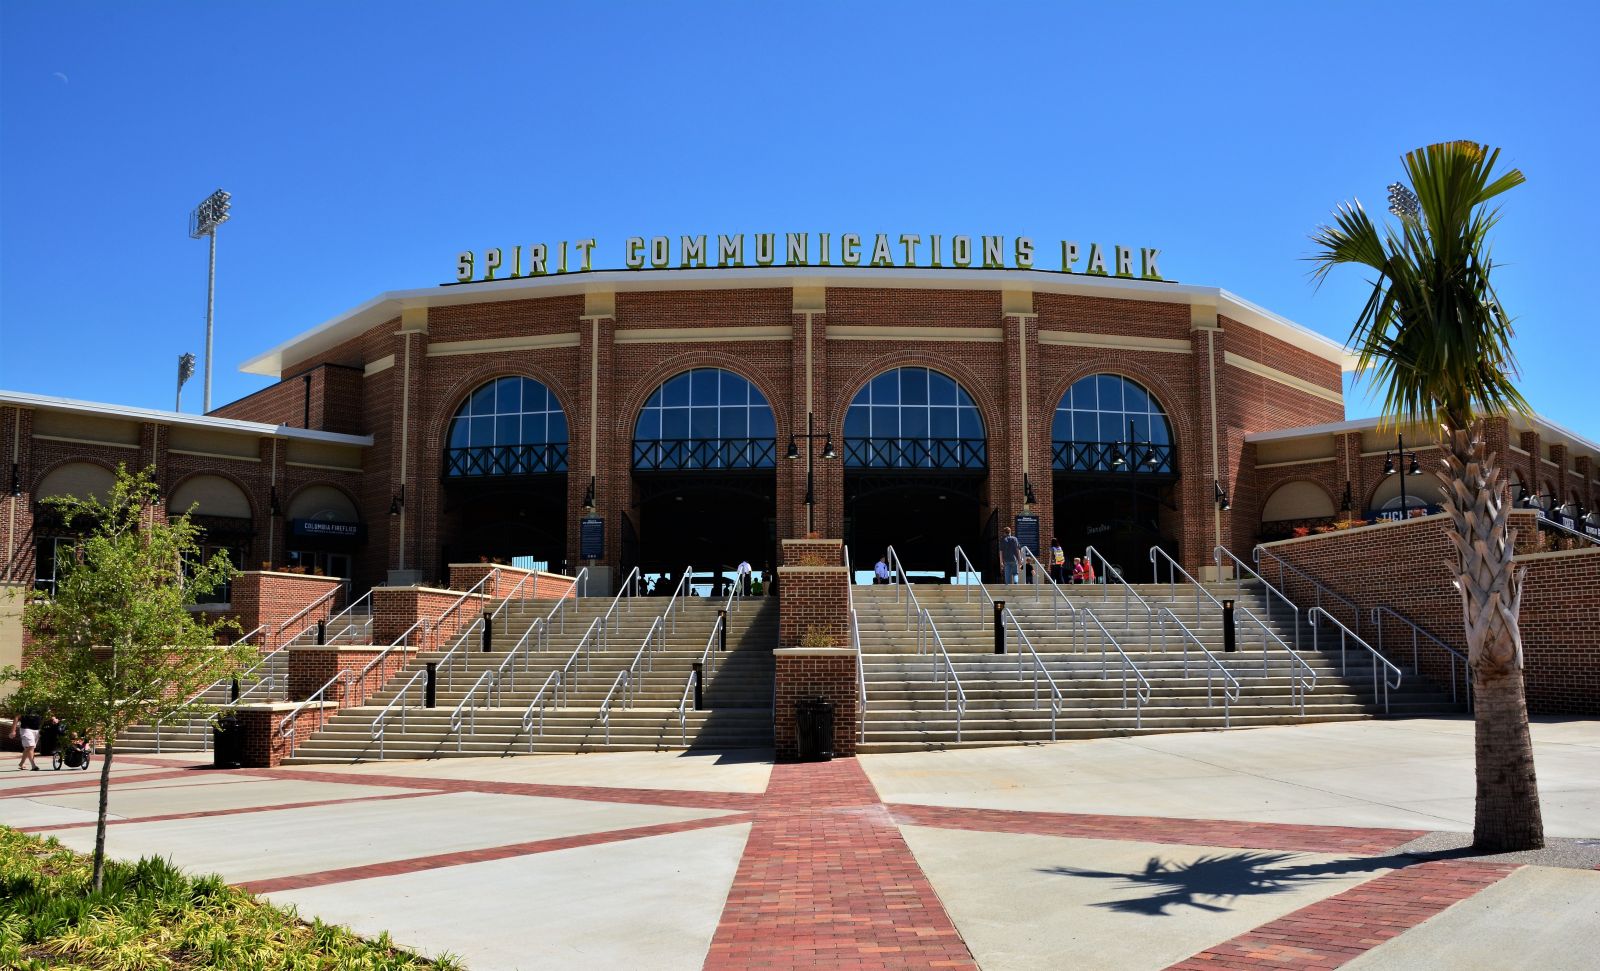 The home of the Columbia Fireflies baseball team, formerly known as Spirit Communications Park, will change to Segra Park after a merger. (Photo/File)